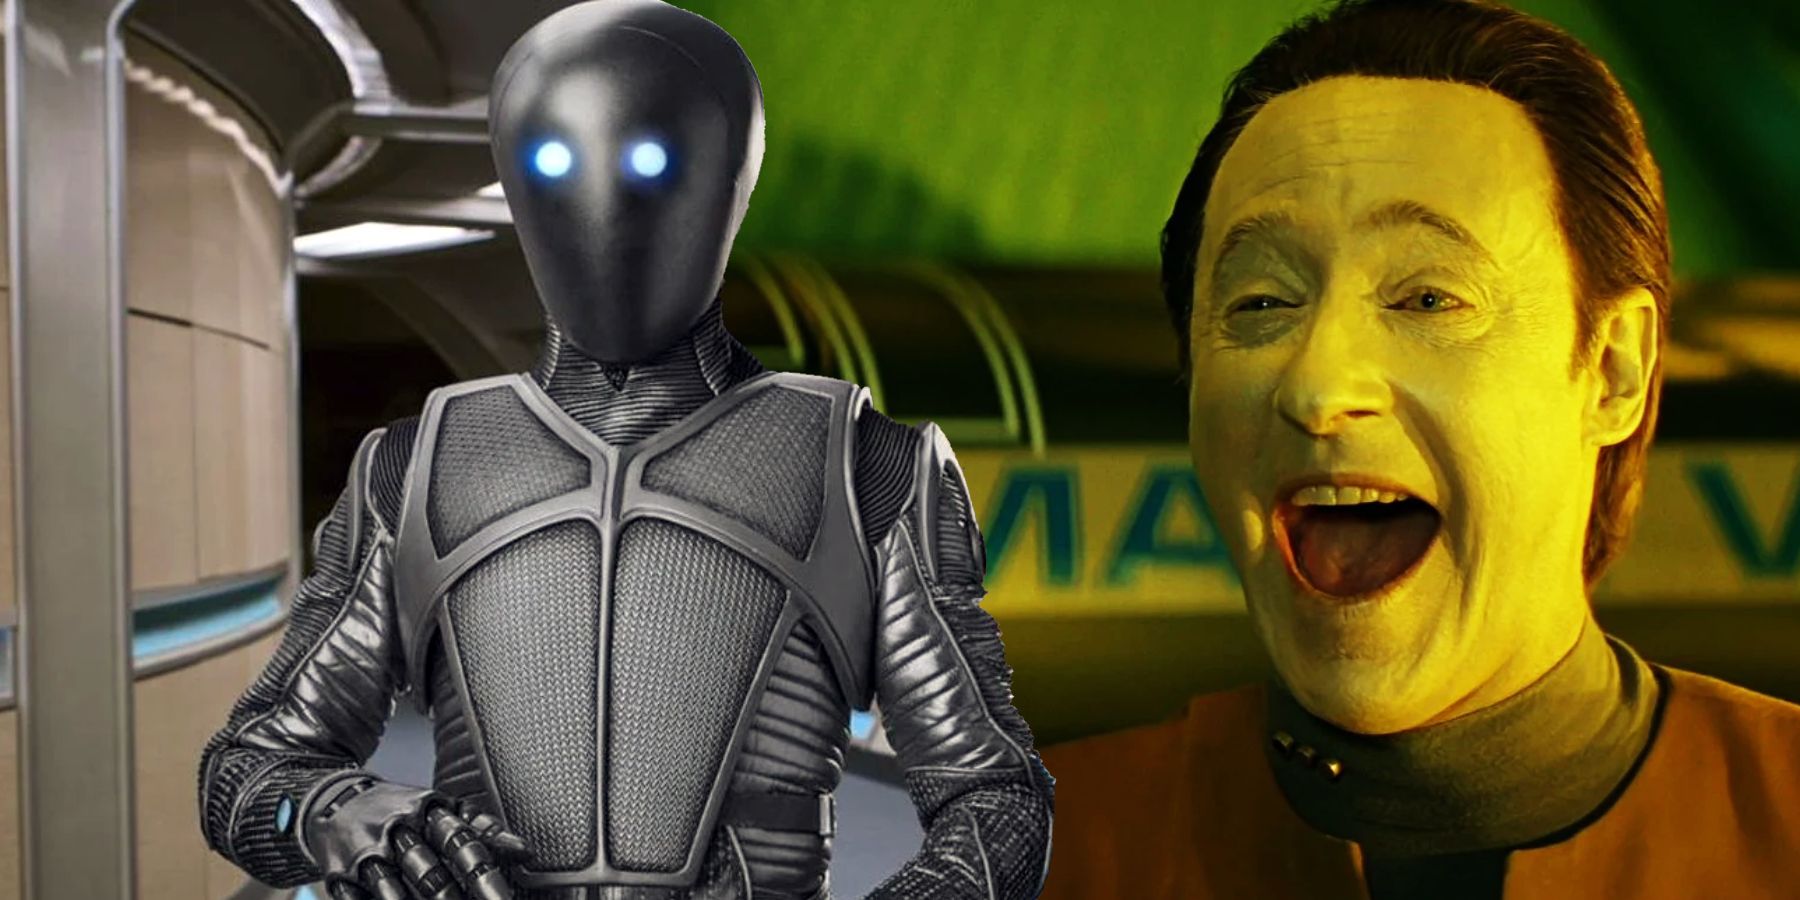 Orville's Isaac reverses Star Trek's android trope